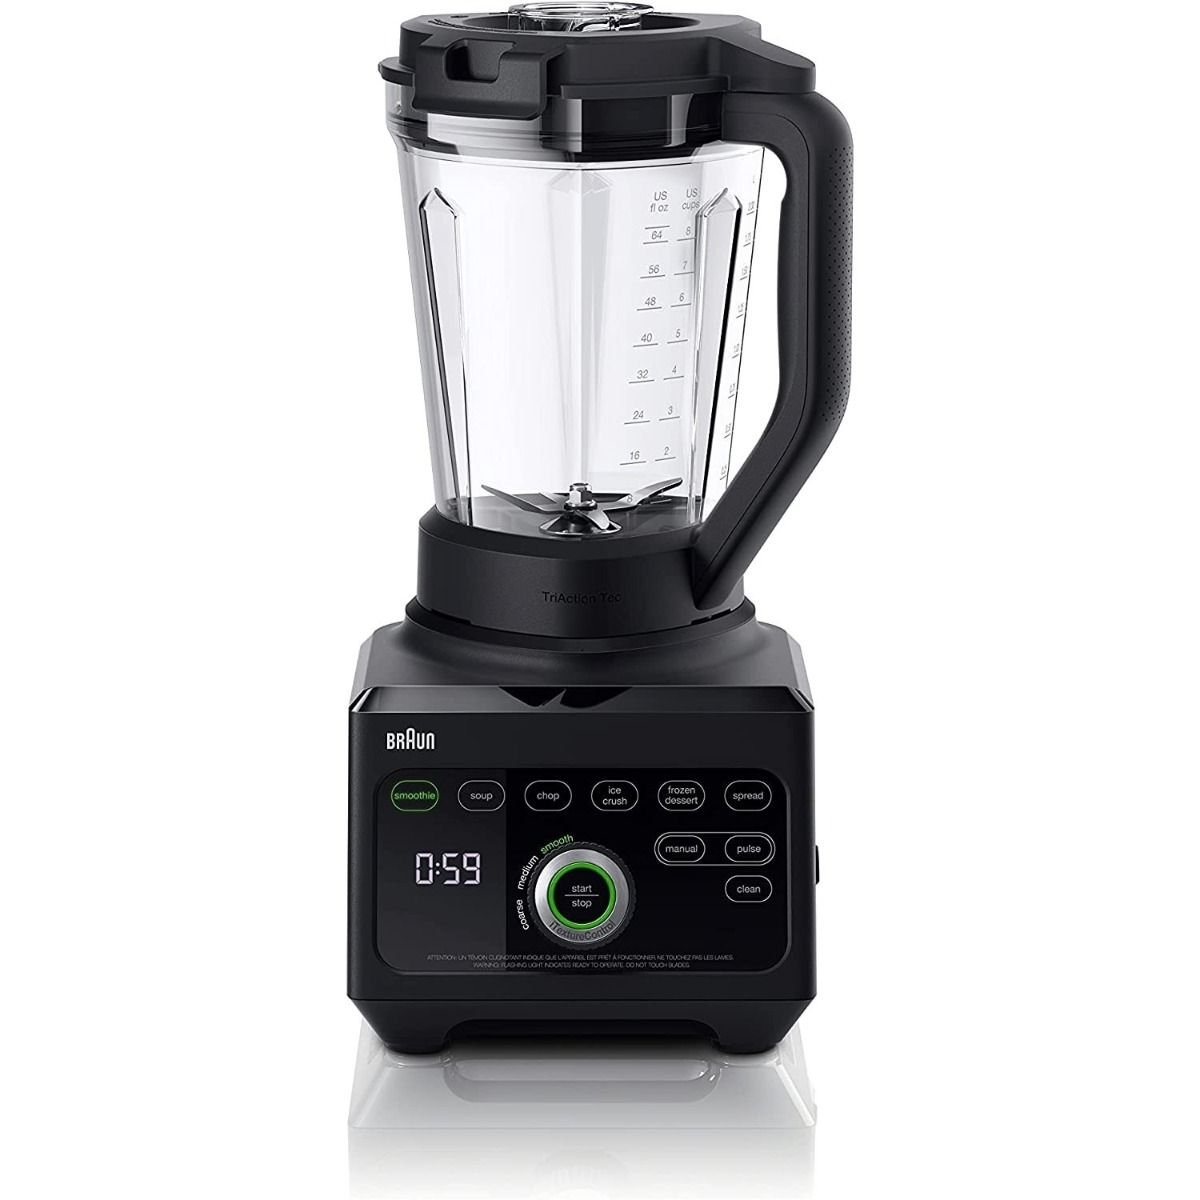 Braun 6-Cup Food Processor Attachment for MultiQuick Blenders